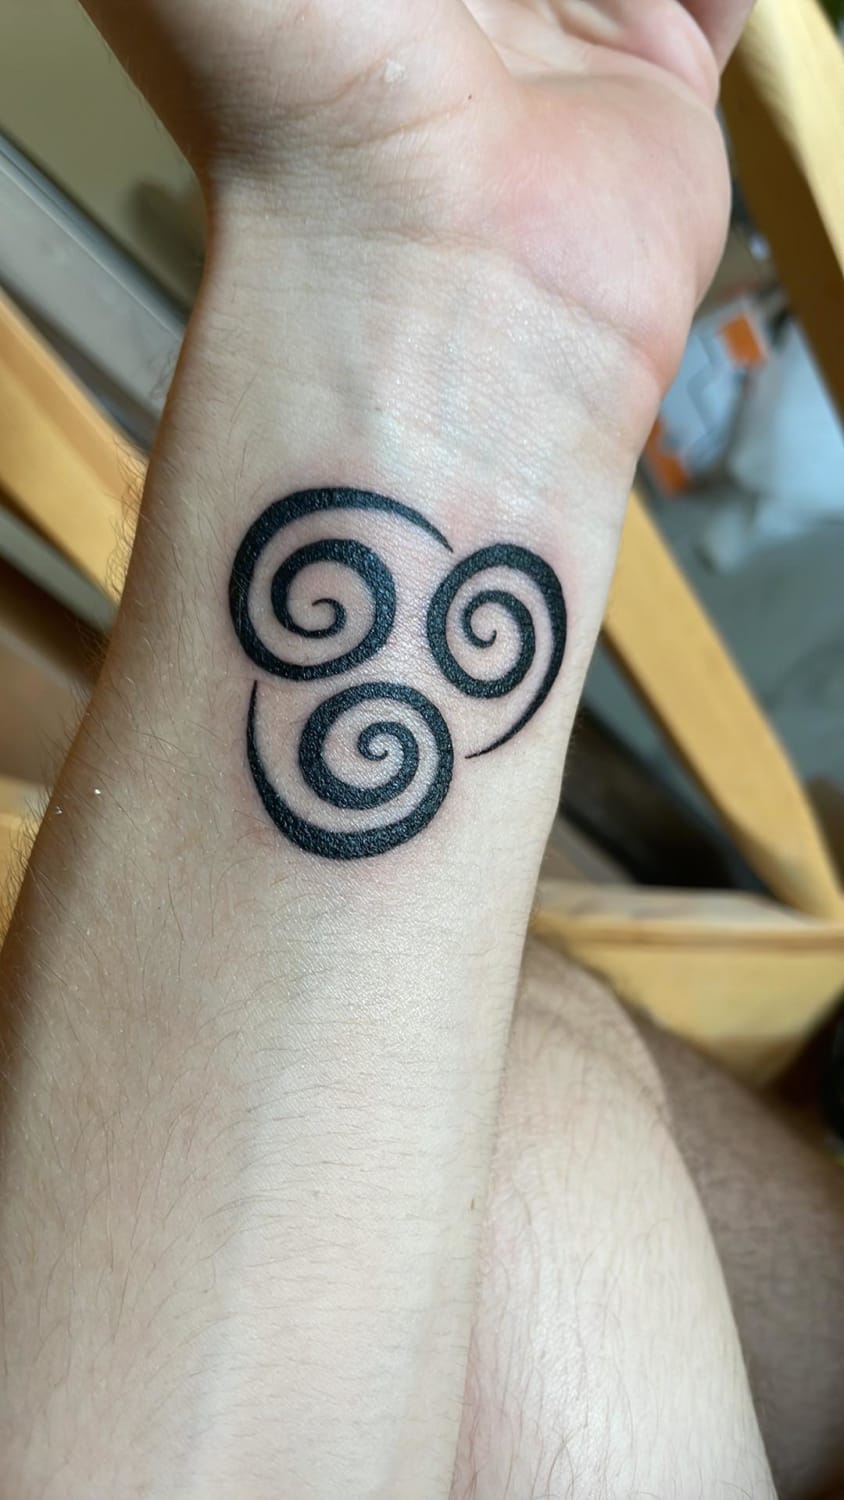 Just got my first tattoo. I thought I’d share it with you guys